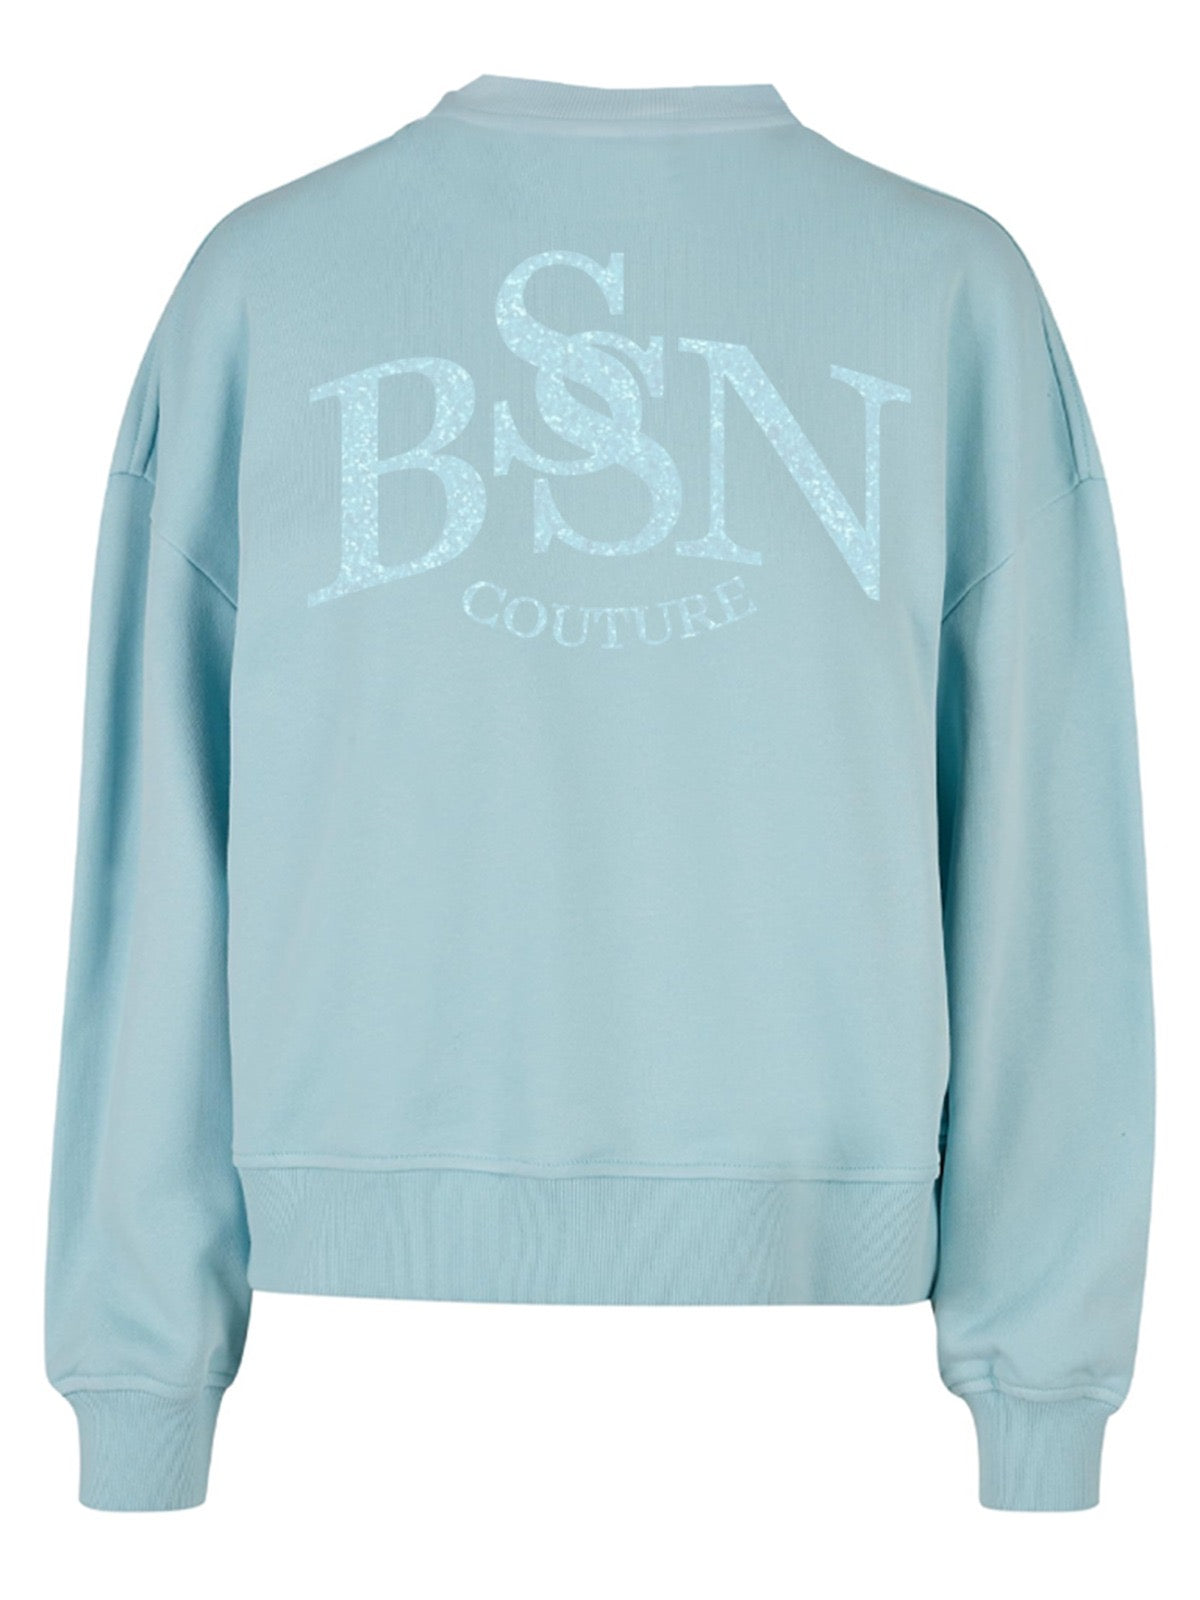 BSN COUTURE Mid sweater - Blauw